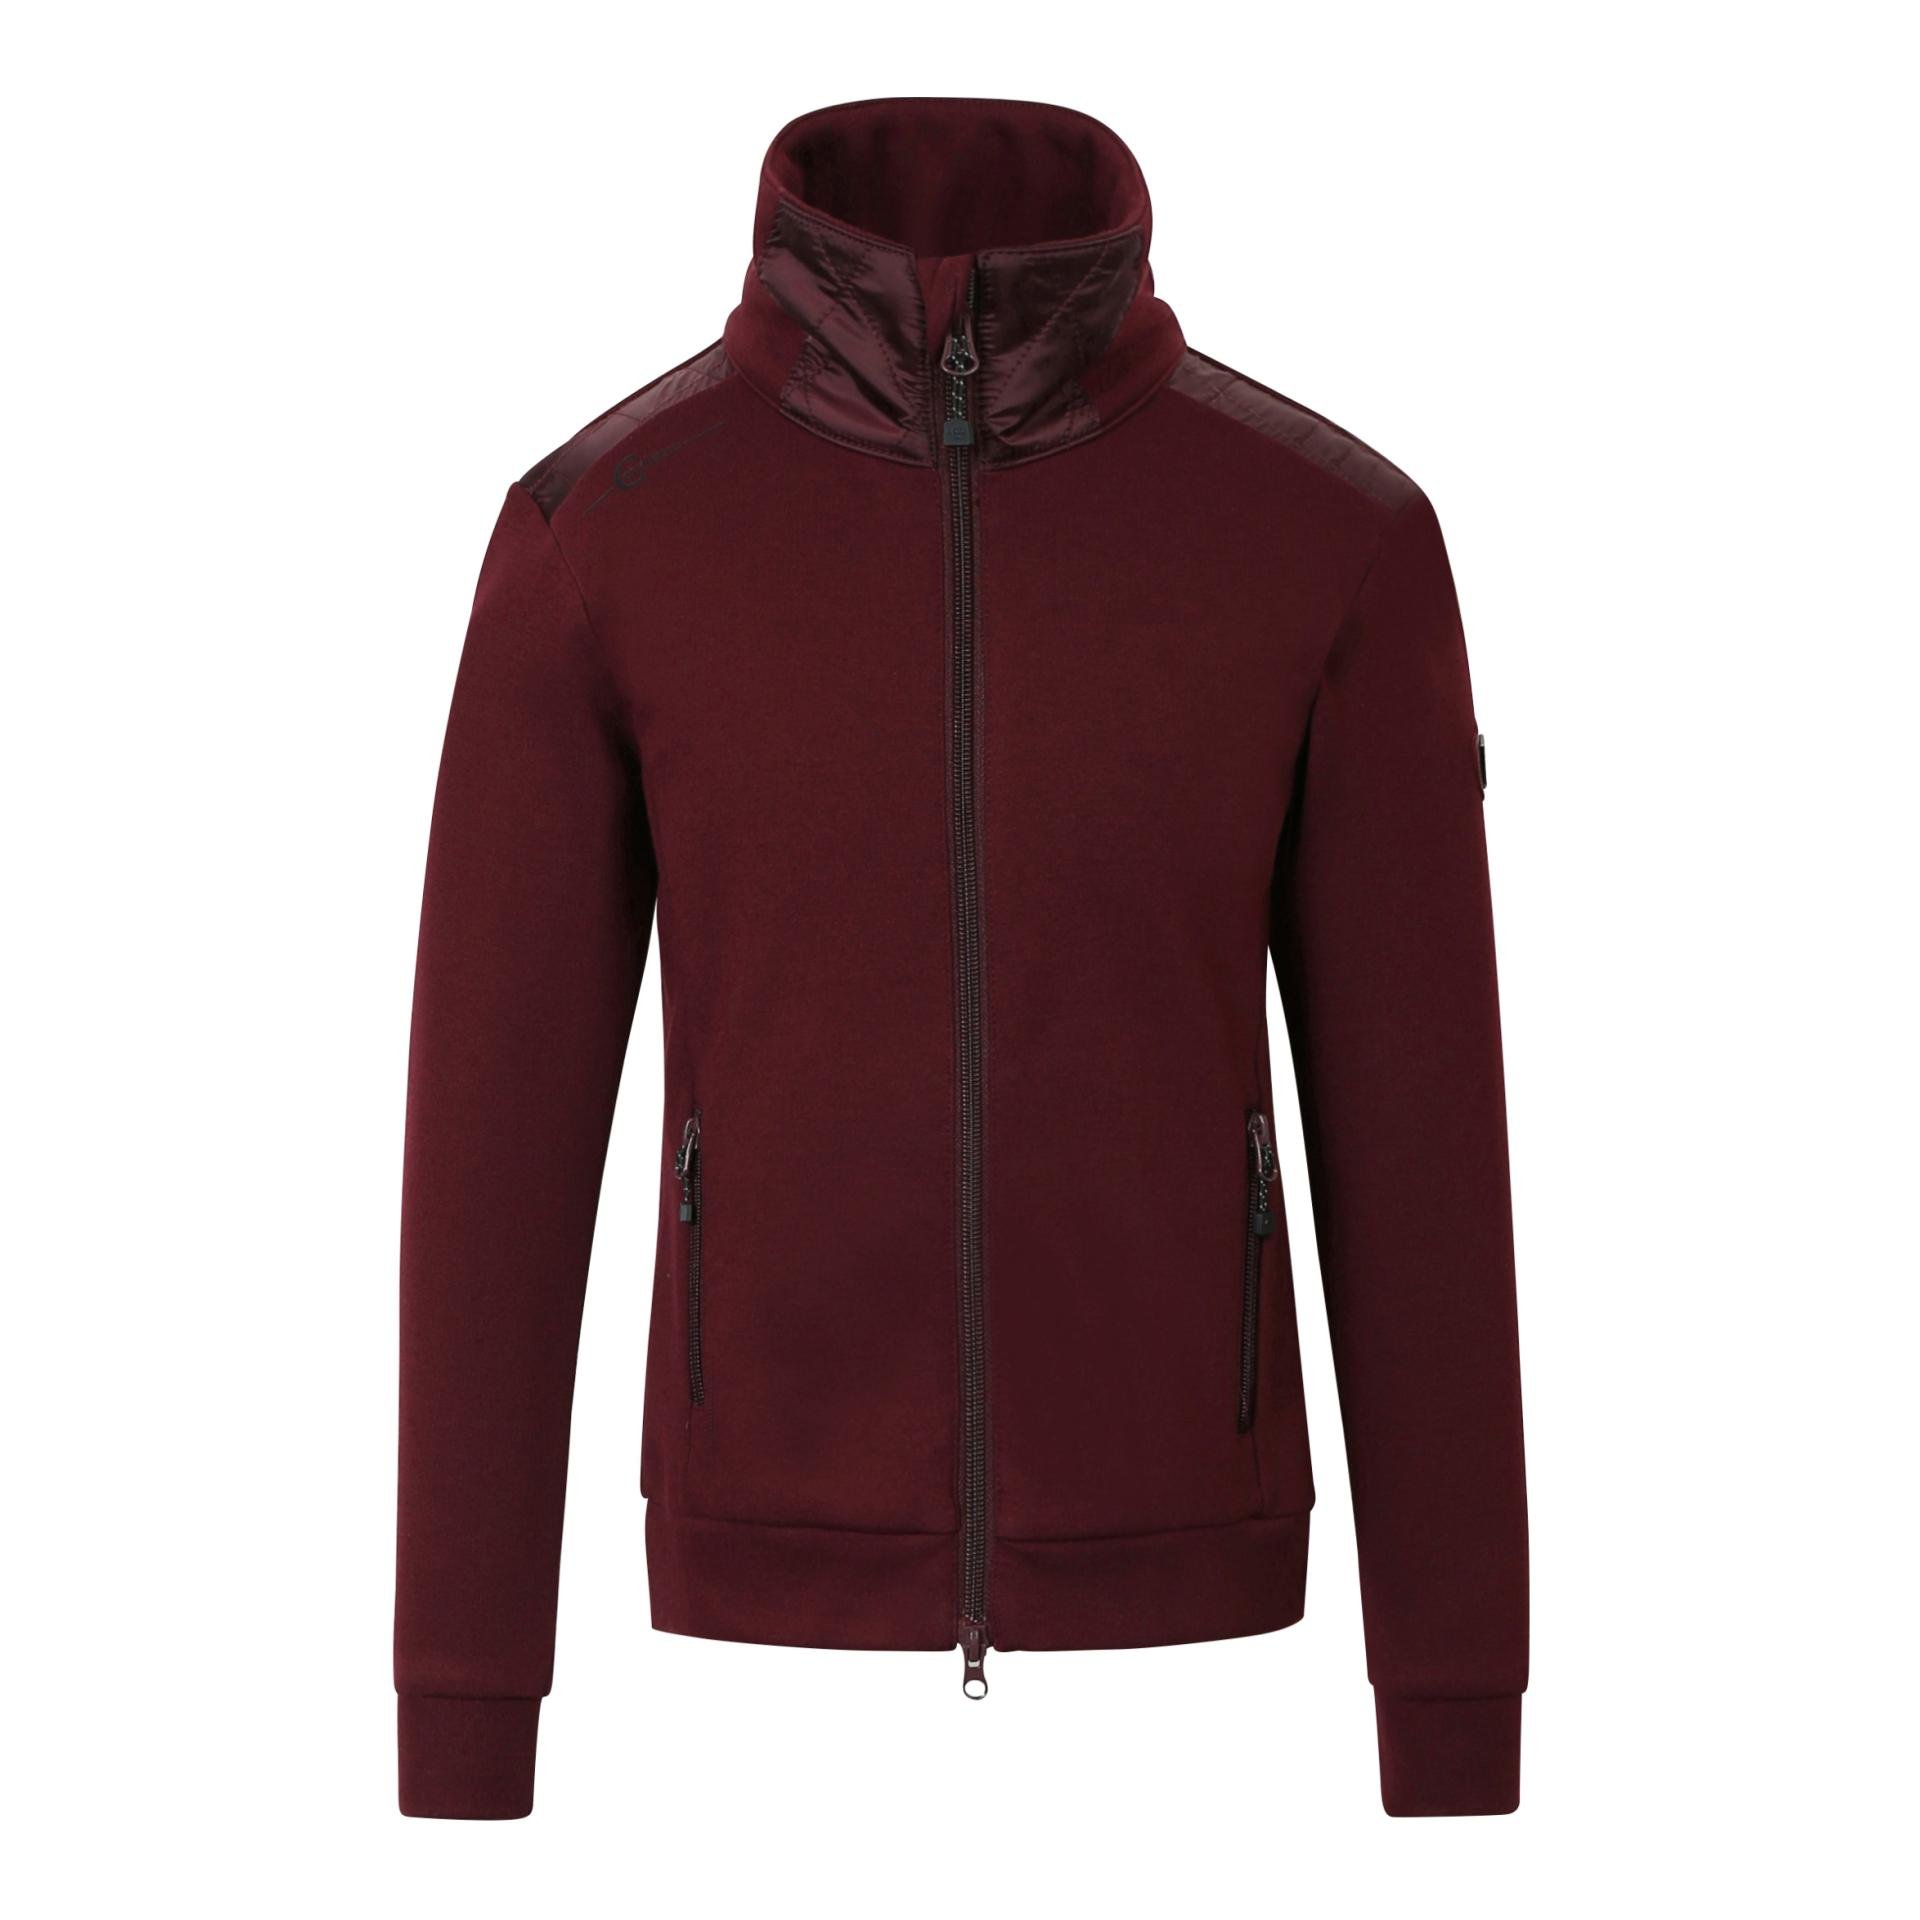 Image of Covalliero Sweatjacke Collection 2021 Kinder - aubergine bei Hauptner.ch